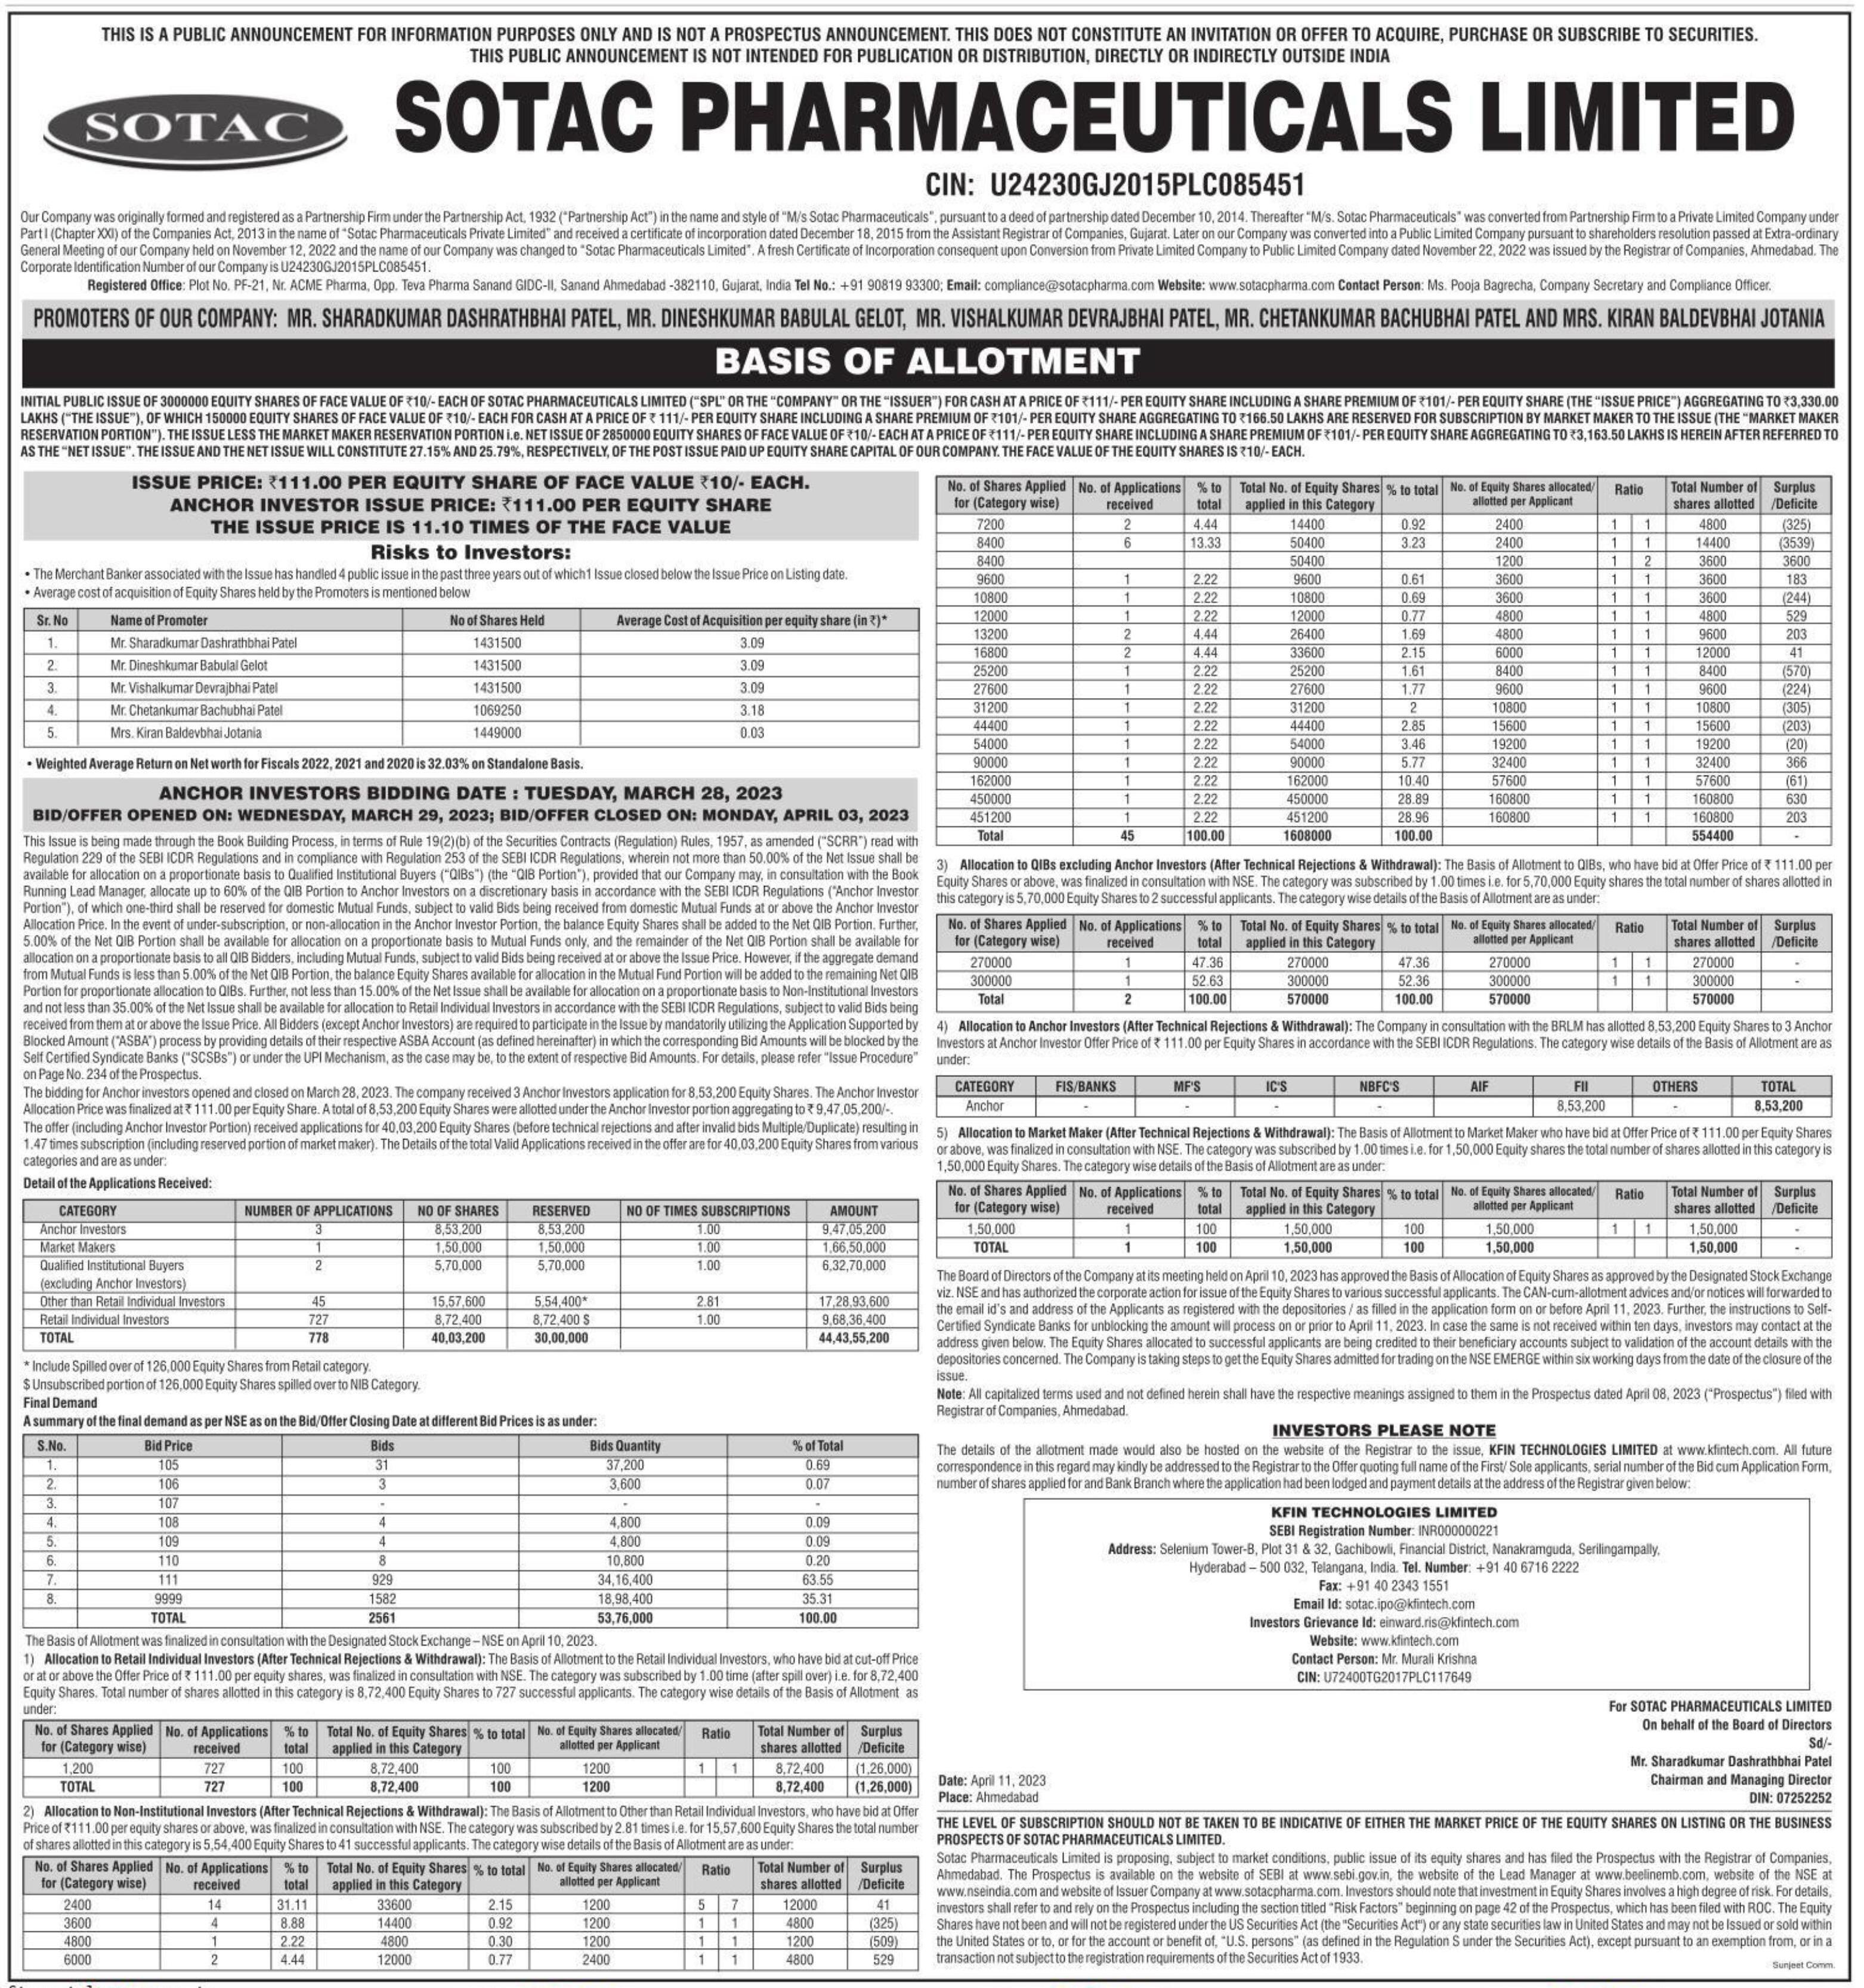 Sotac Pharmaceuticals Limited IPO Basis of Allotment